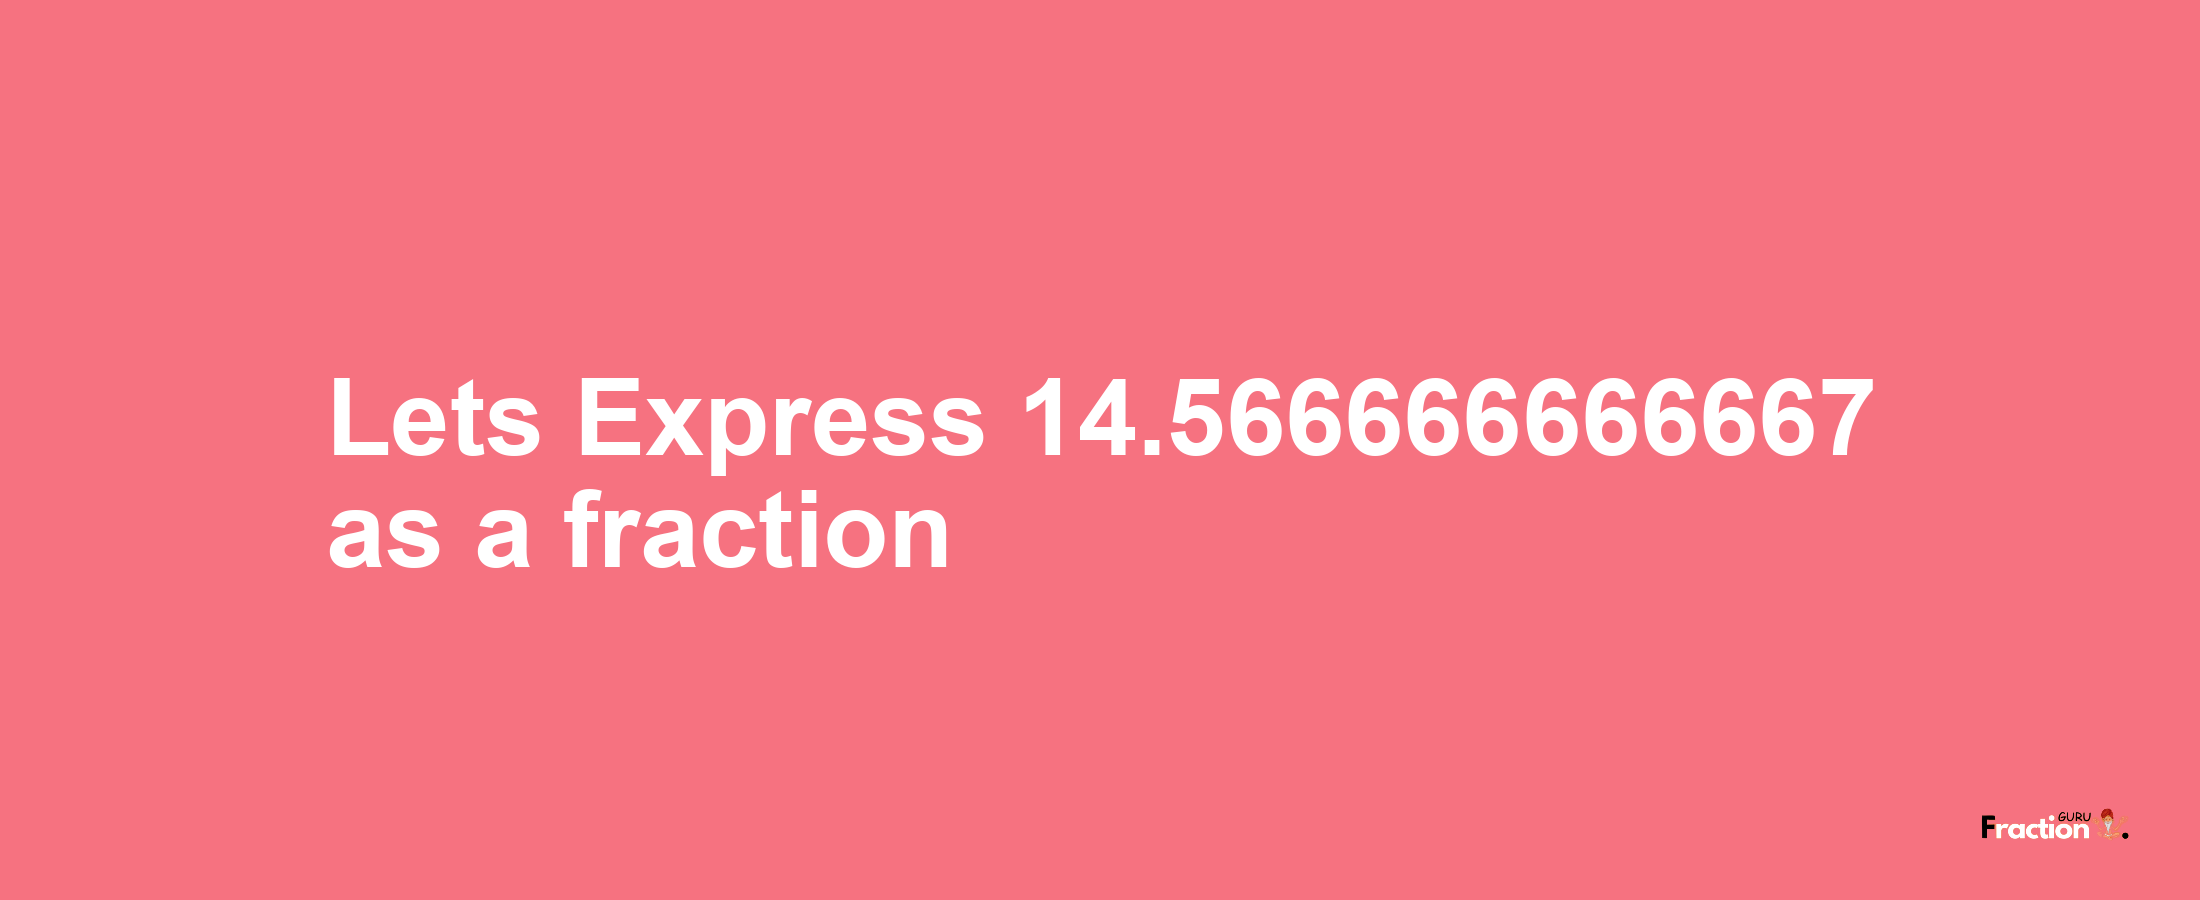 Lets Express 14.566666666667 as afraction